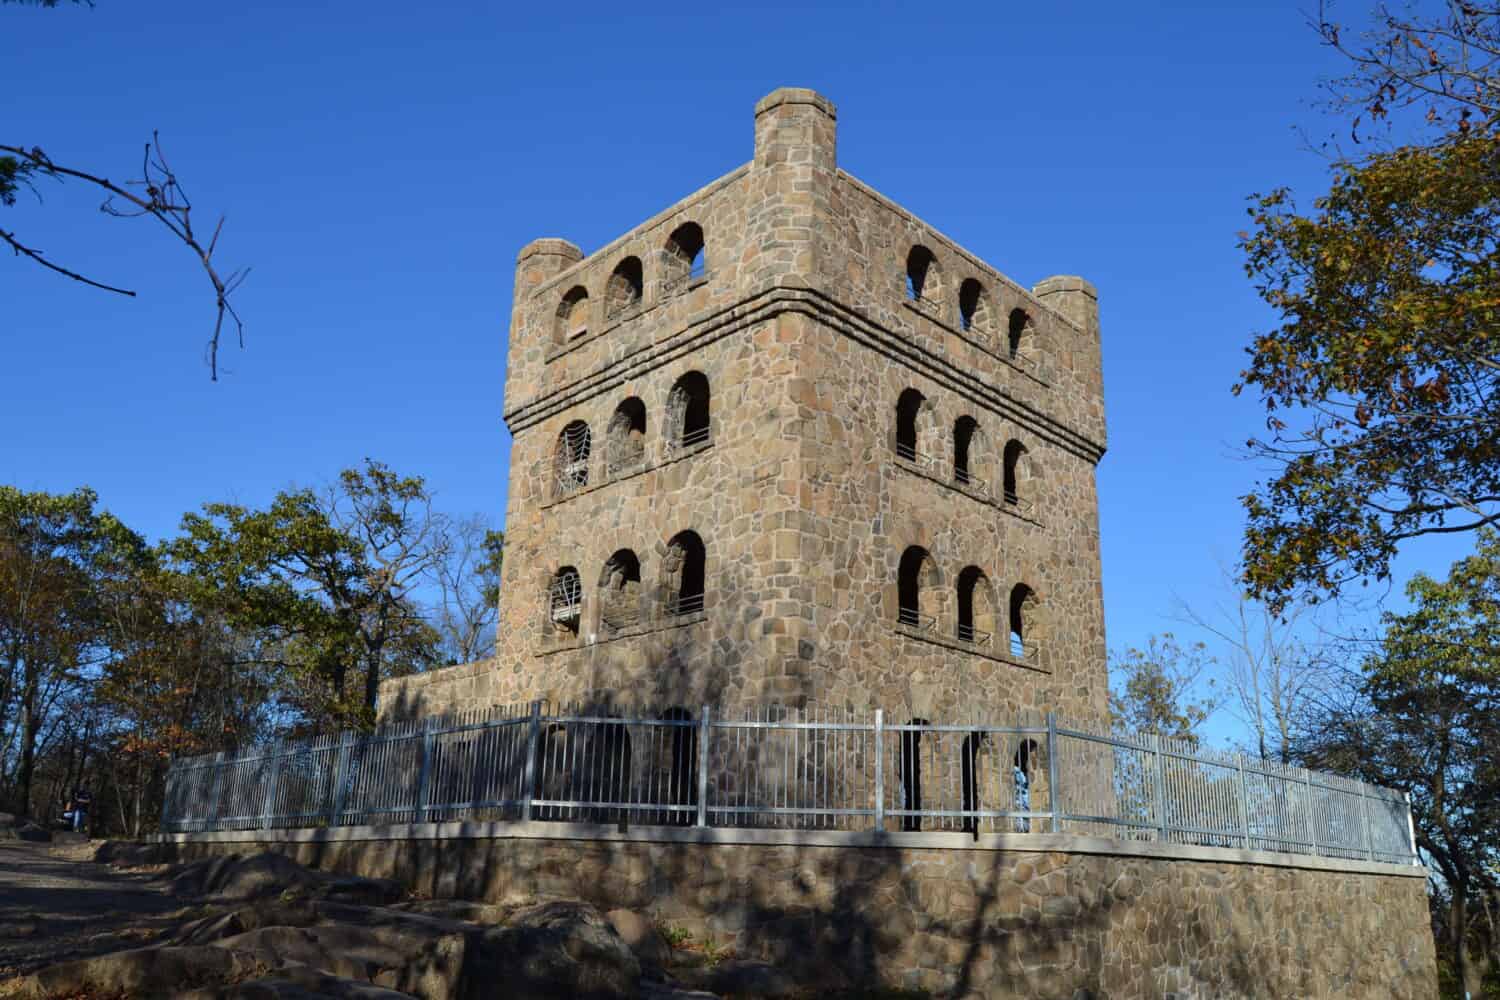 The Tower at Sleeping Giant State Park